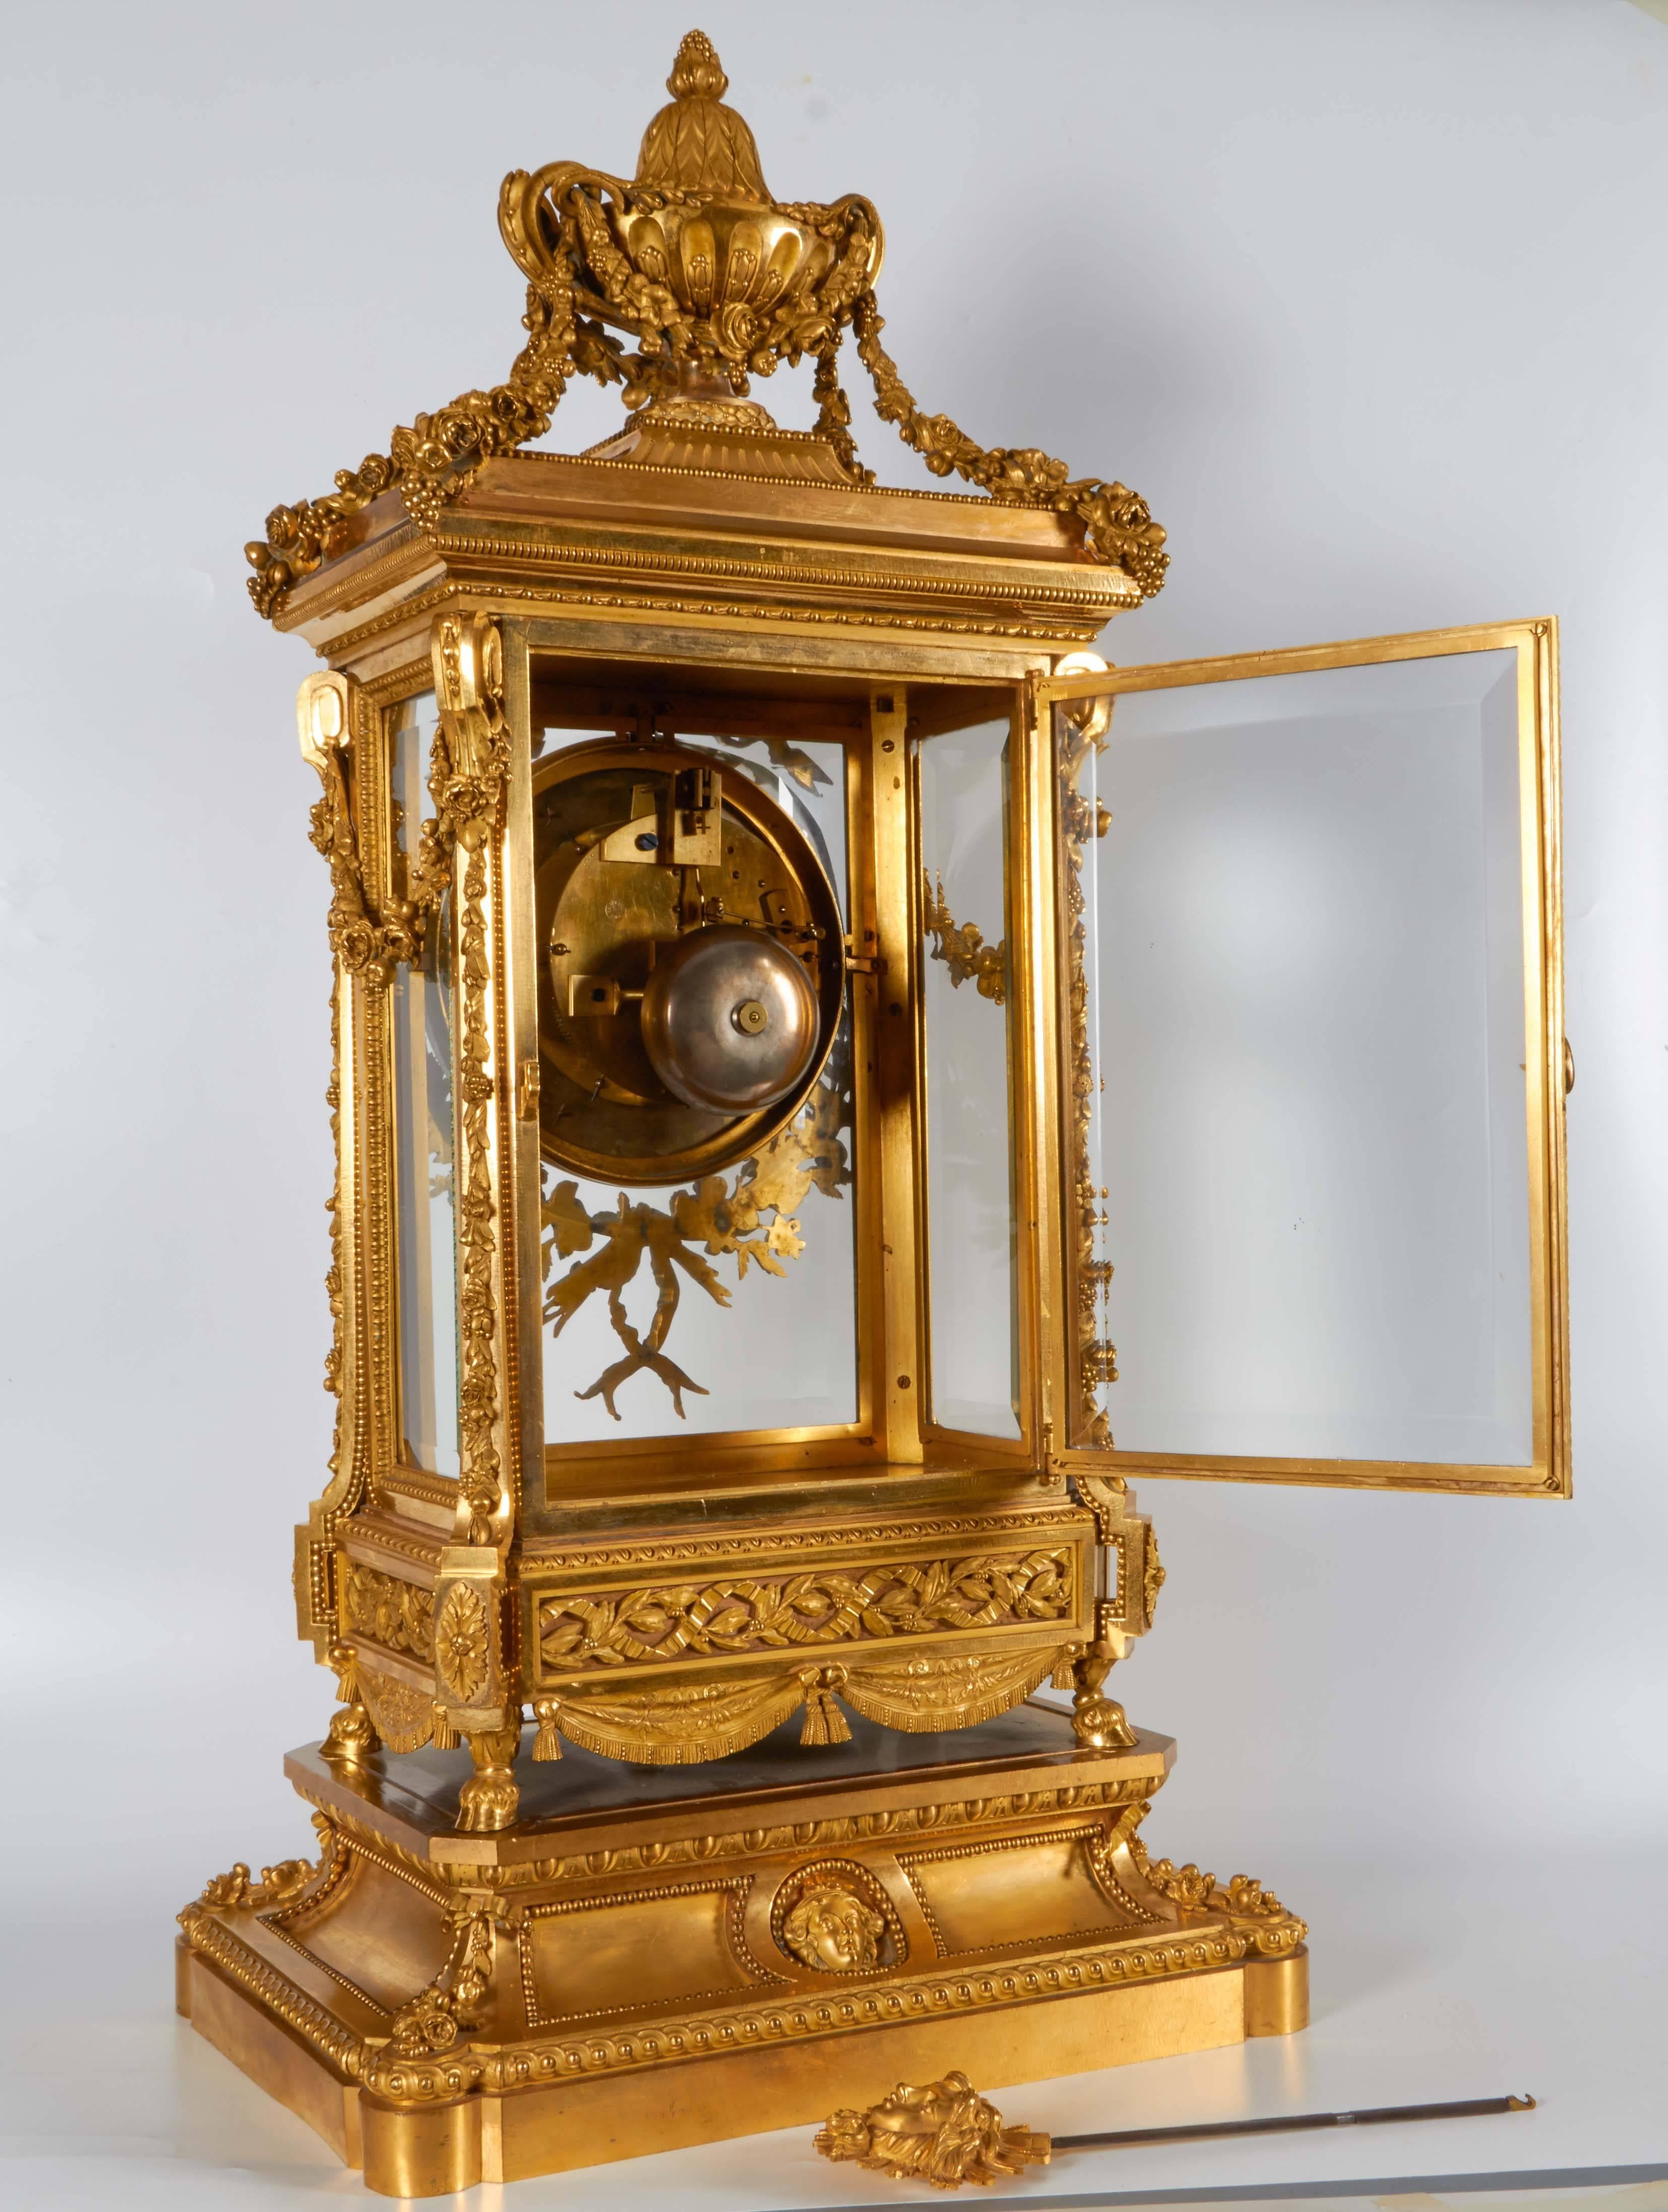 Monumental Antique French Louis XVI Style Ormolu Mantel Clock by Maison Marquis In Excellent Condition For Sale In New York, NY